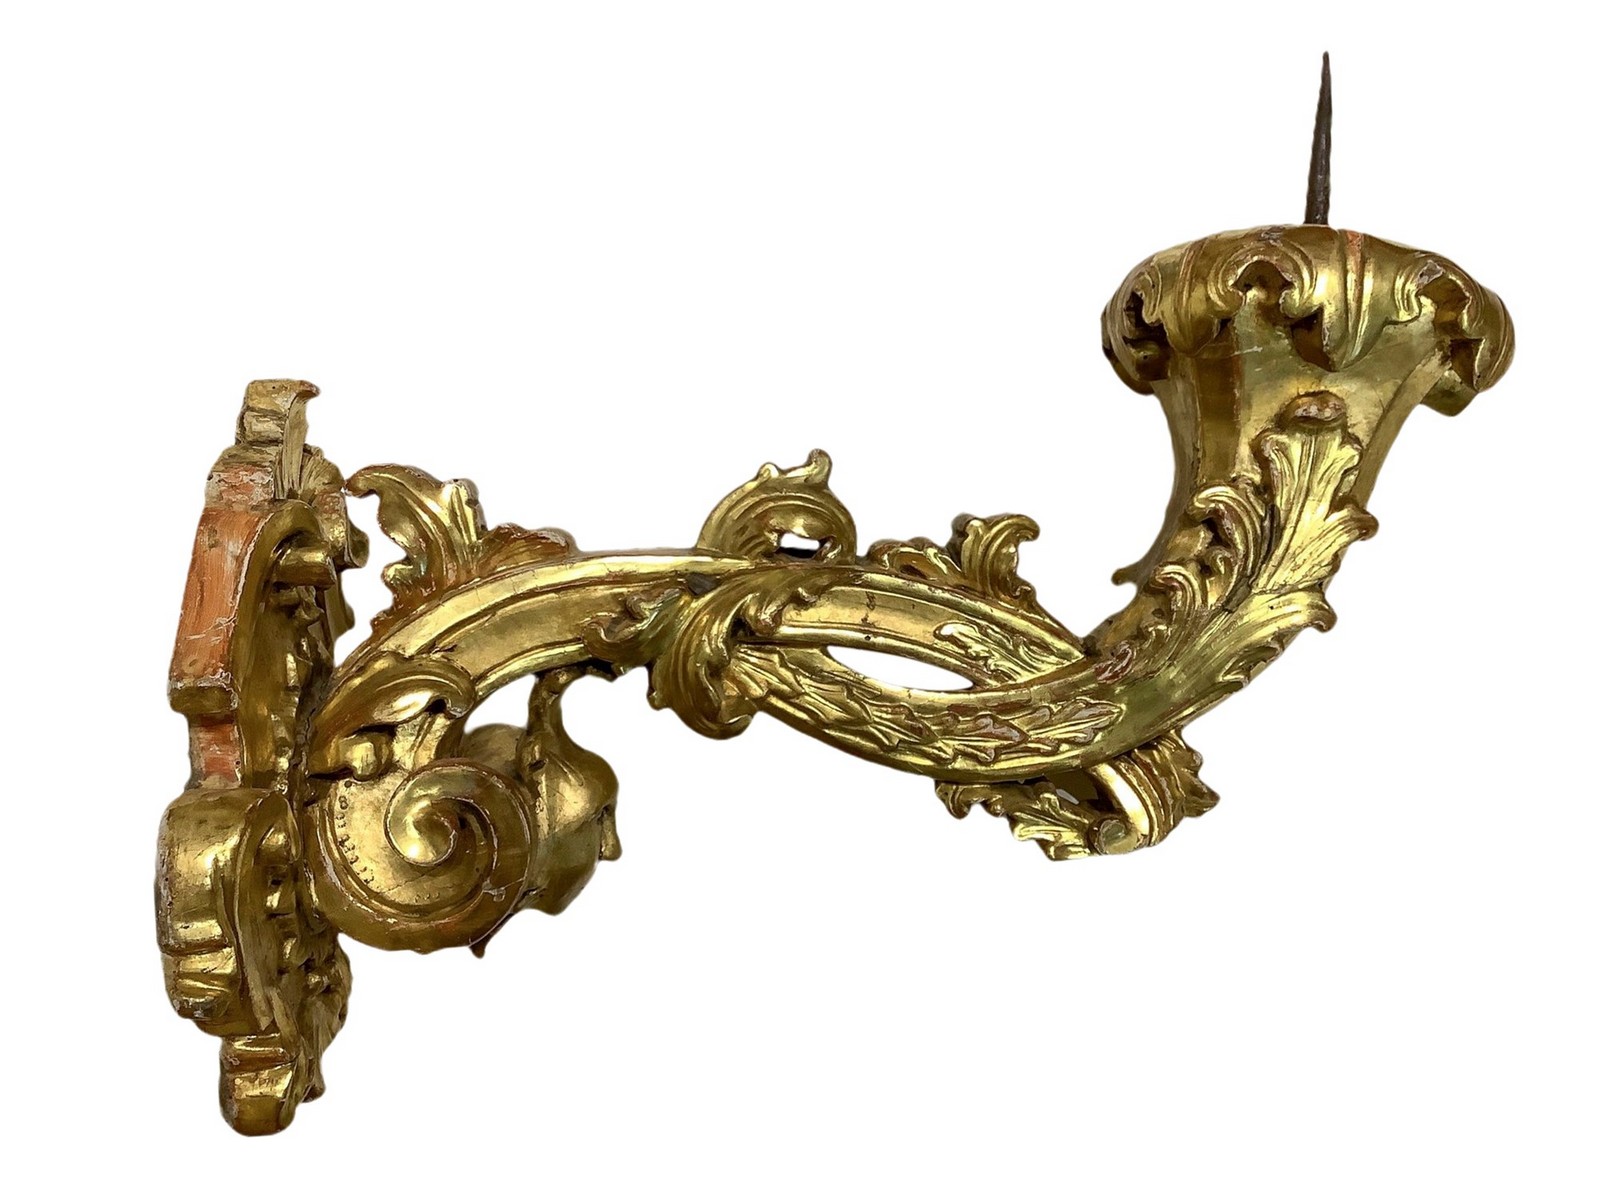 Pair of arms in gilded wood, XVIII / XIX century - Image 5 of 7